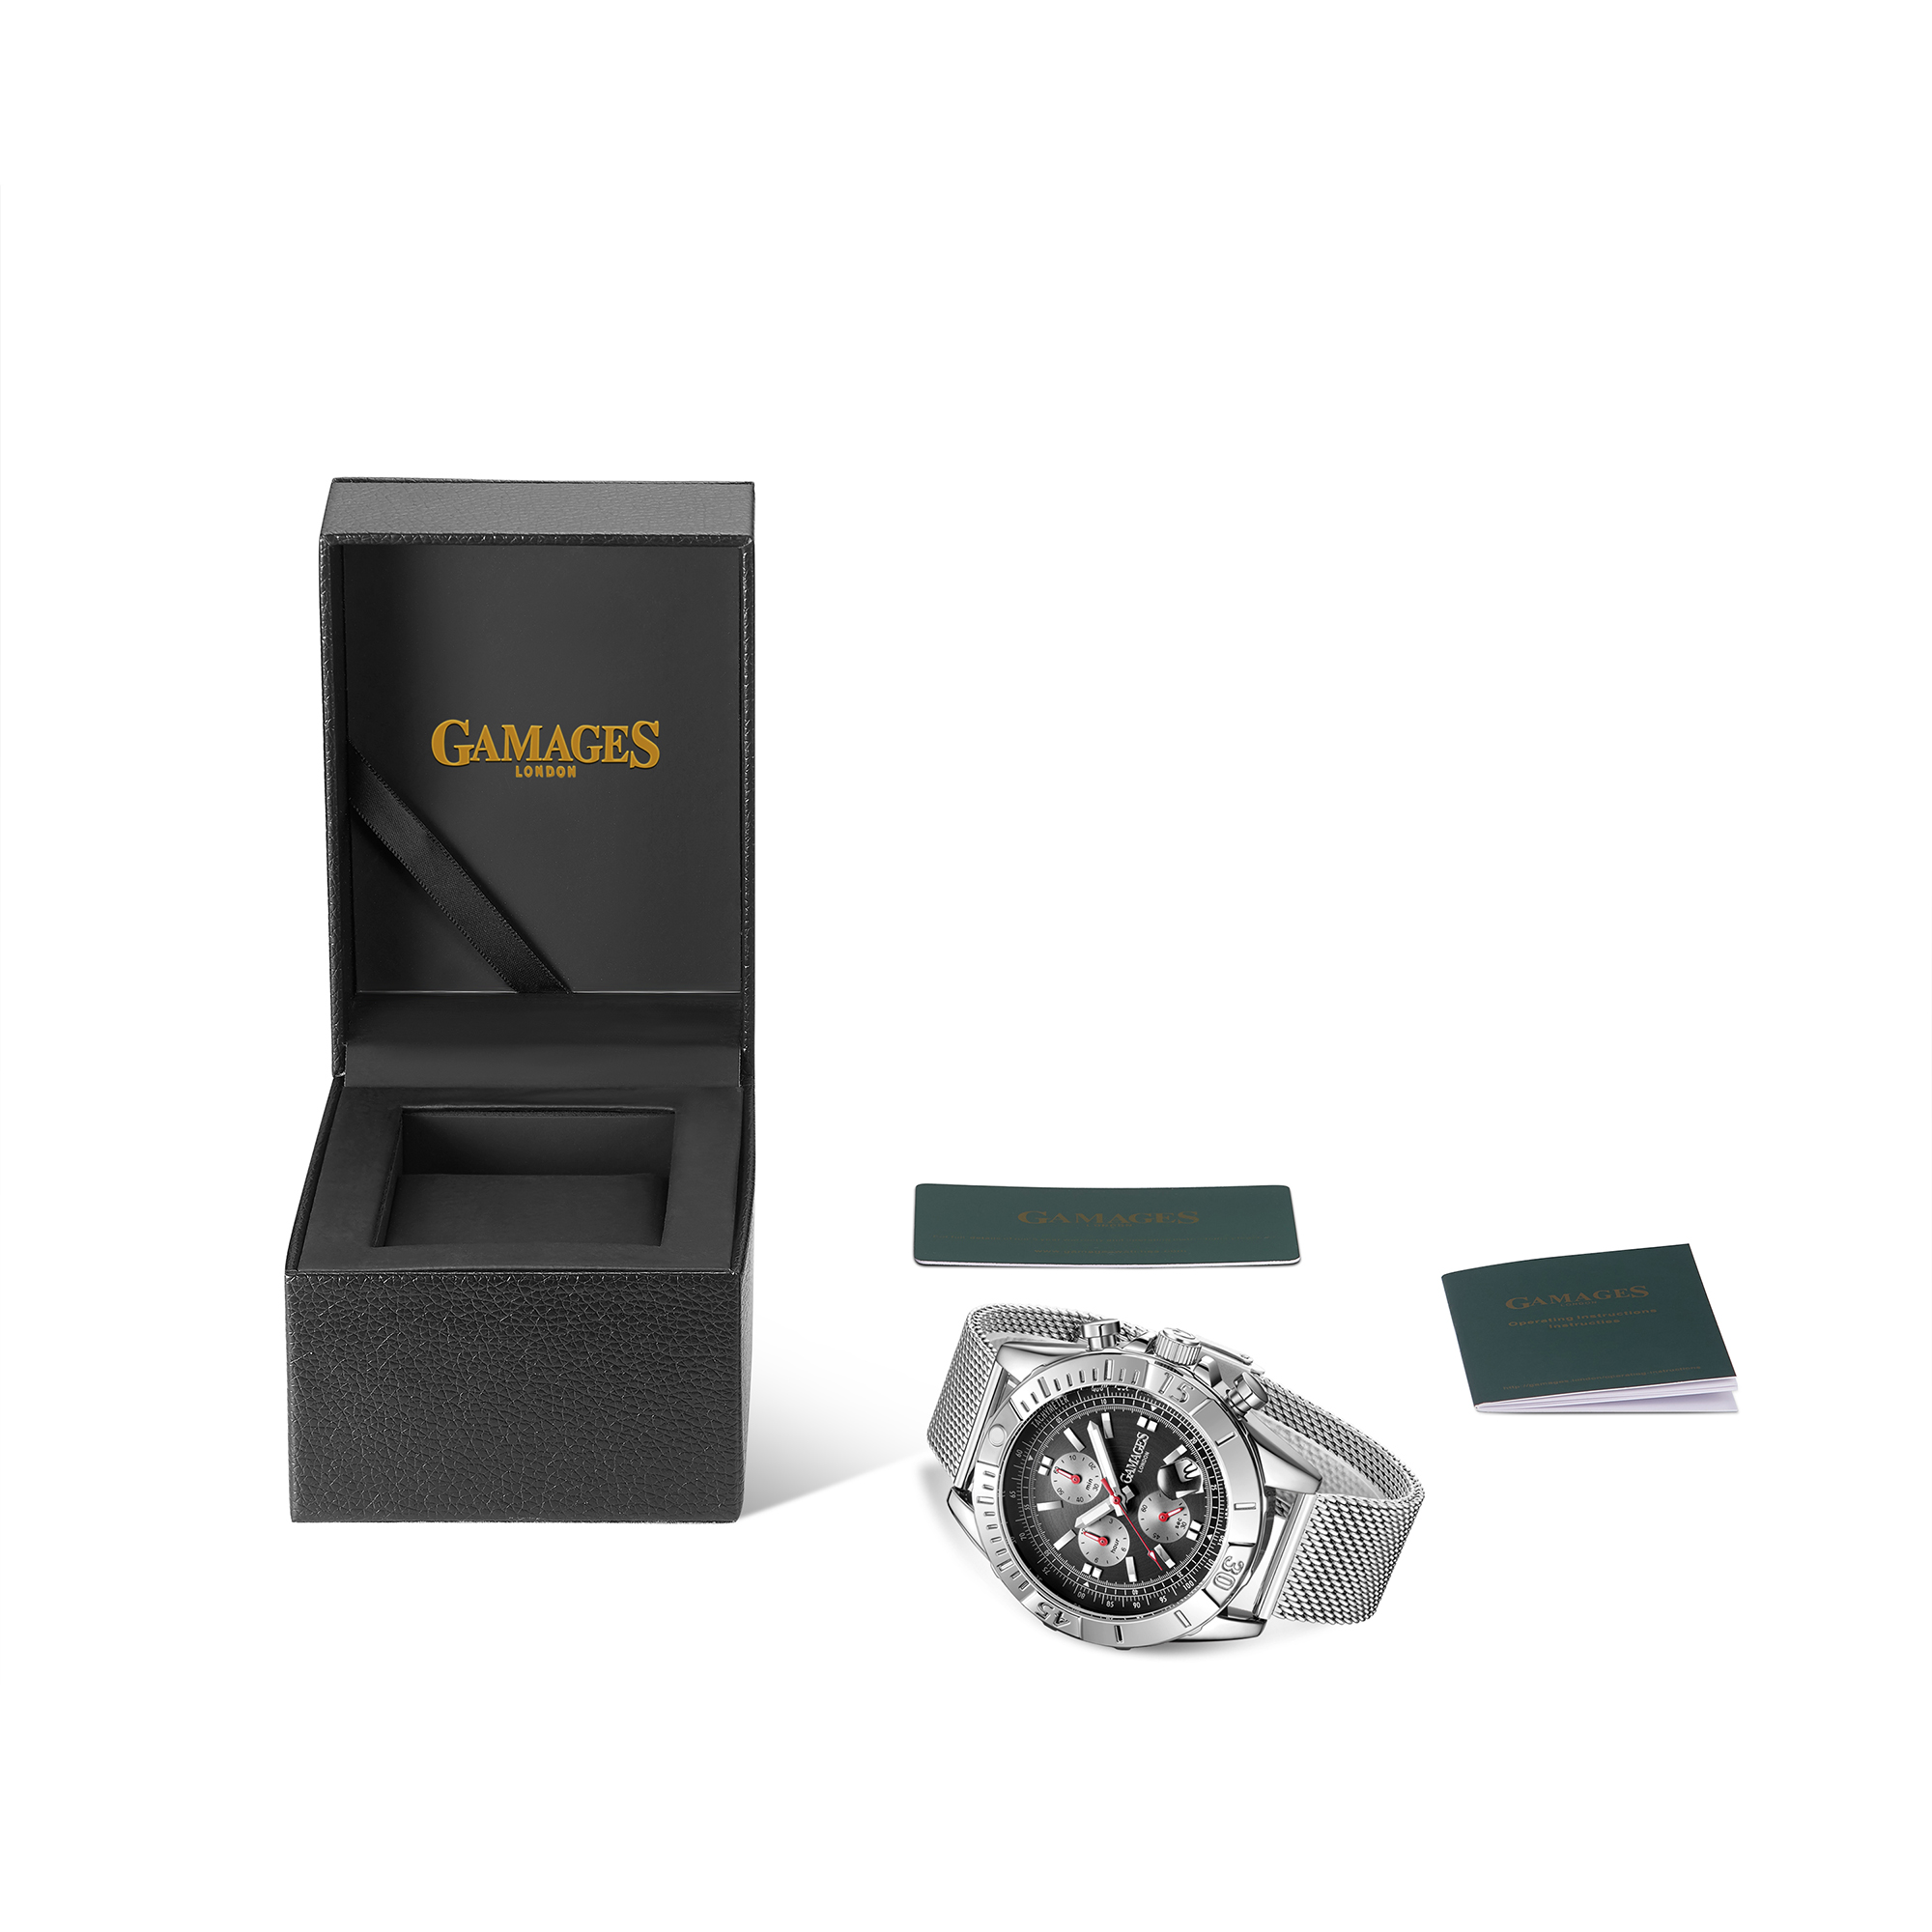 Gamages of London Hand Assembled Gild Quartz Hybrid Silver Black- 5 Year Warranty and Free Delive...